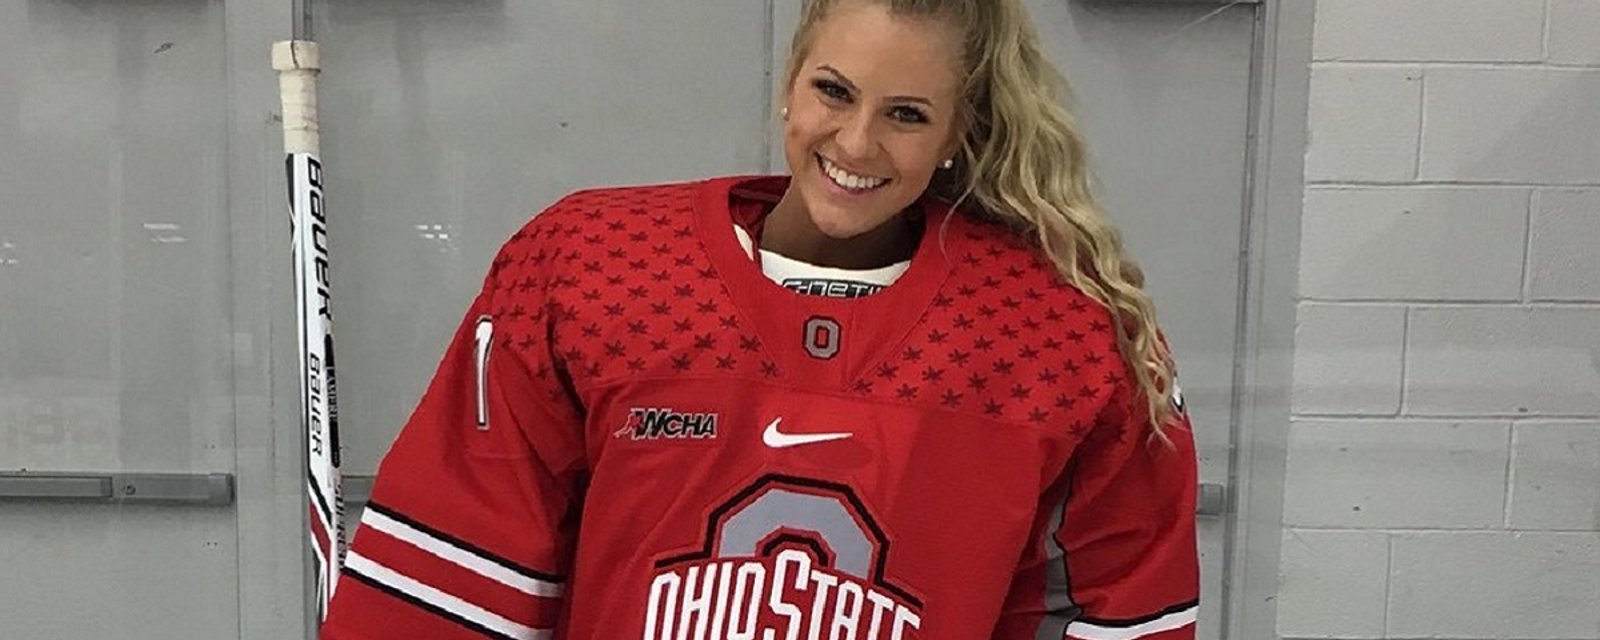 Must See: Ohio State goaltender might be the hottest athlete in NCAA